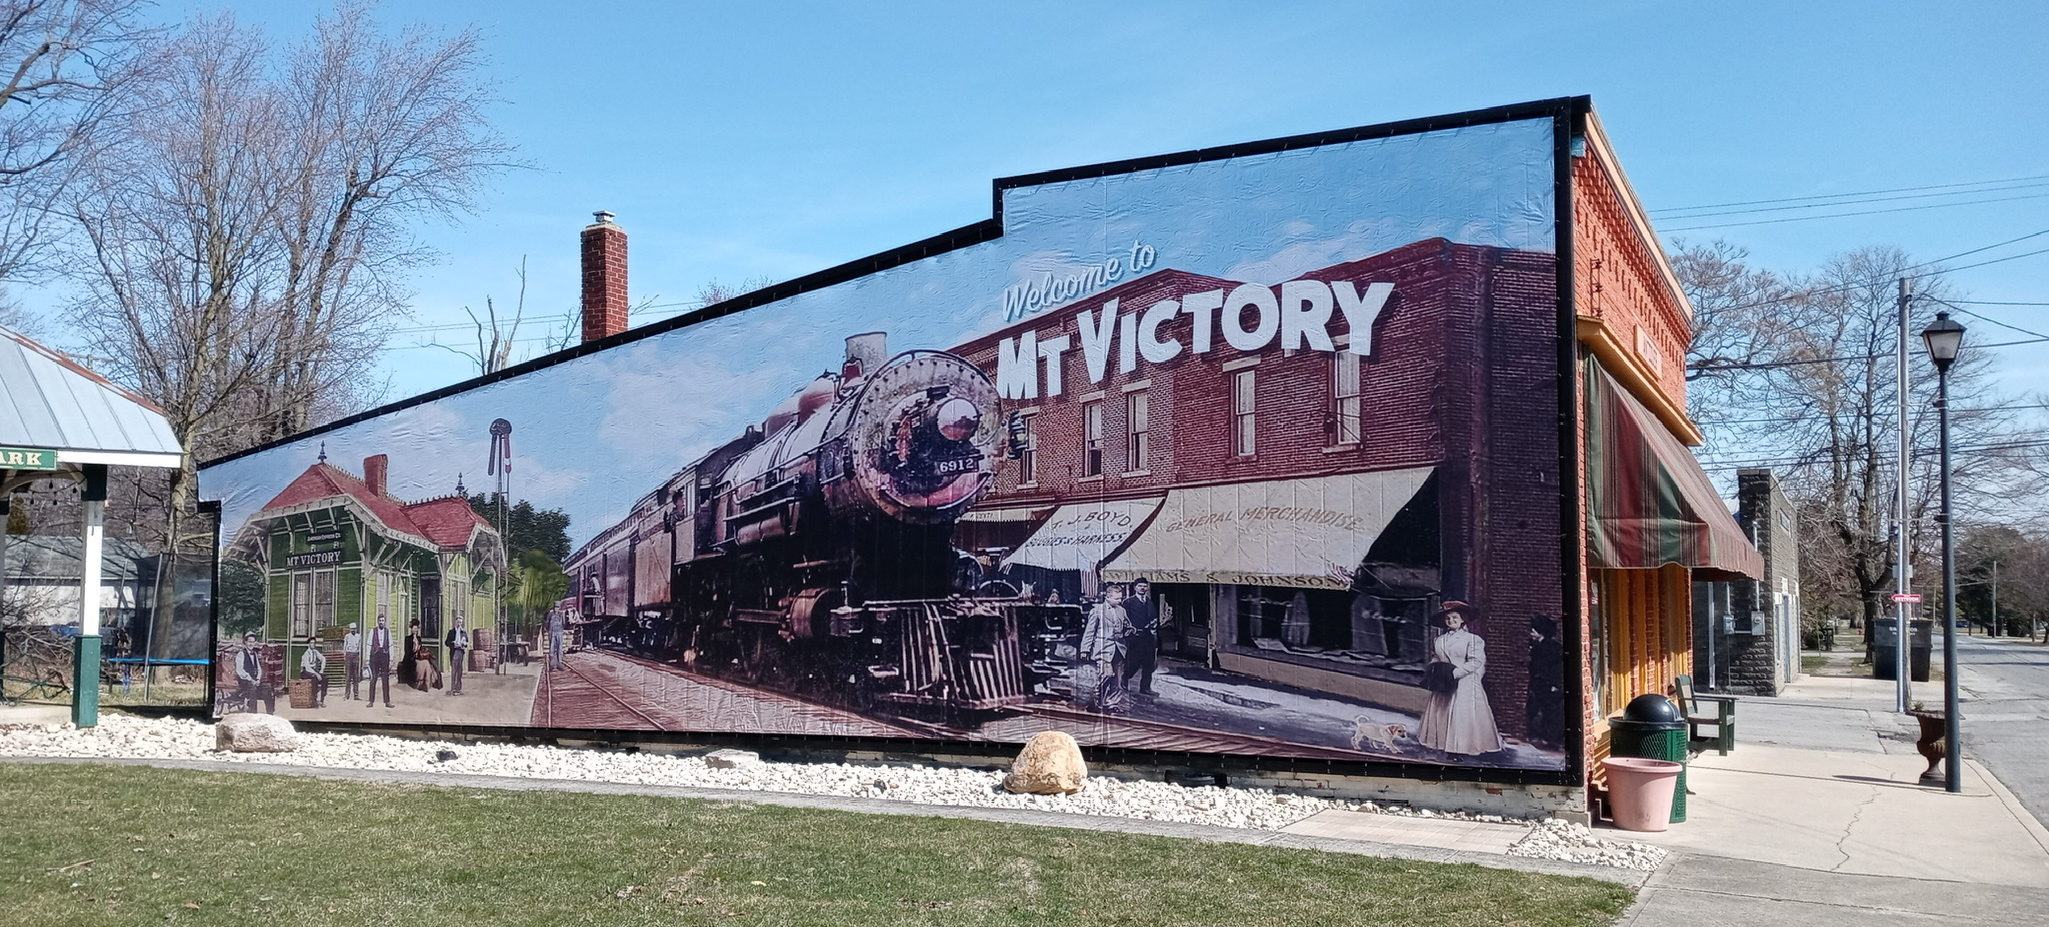 welcome-to-mt-victory-wallscape-mural-signspring-bannerframe-classic-lind